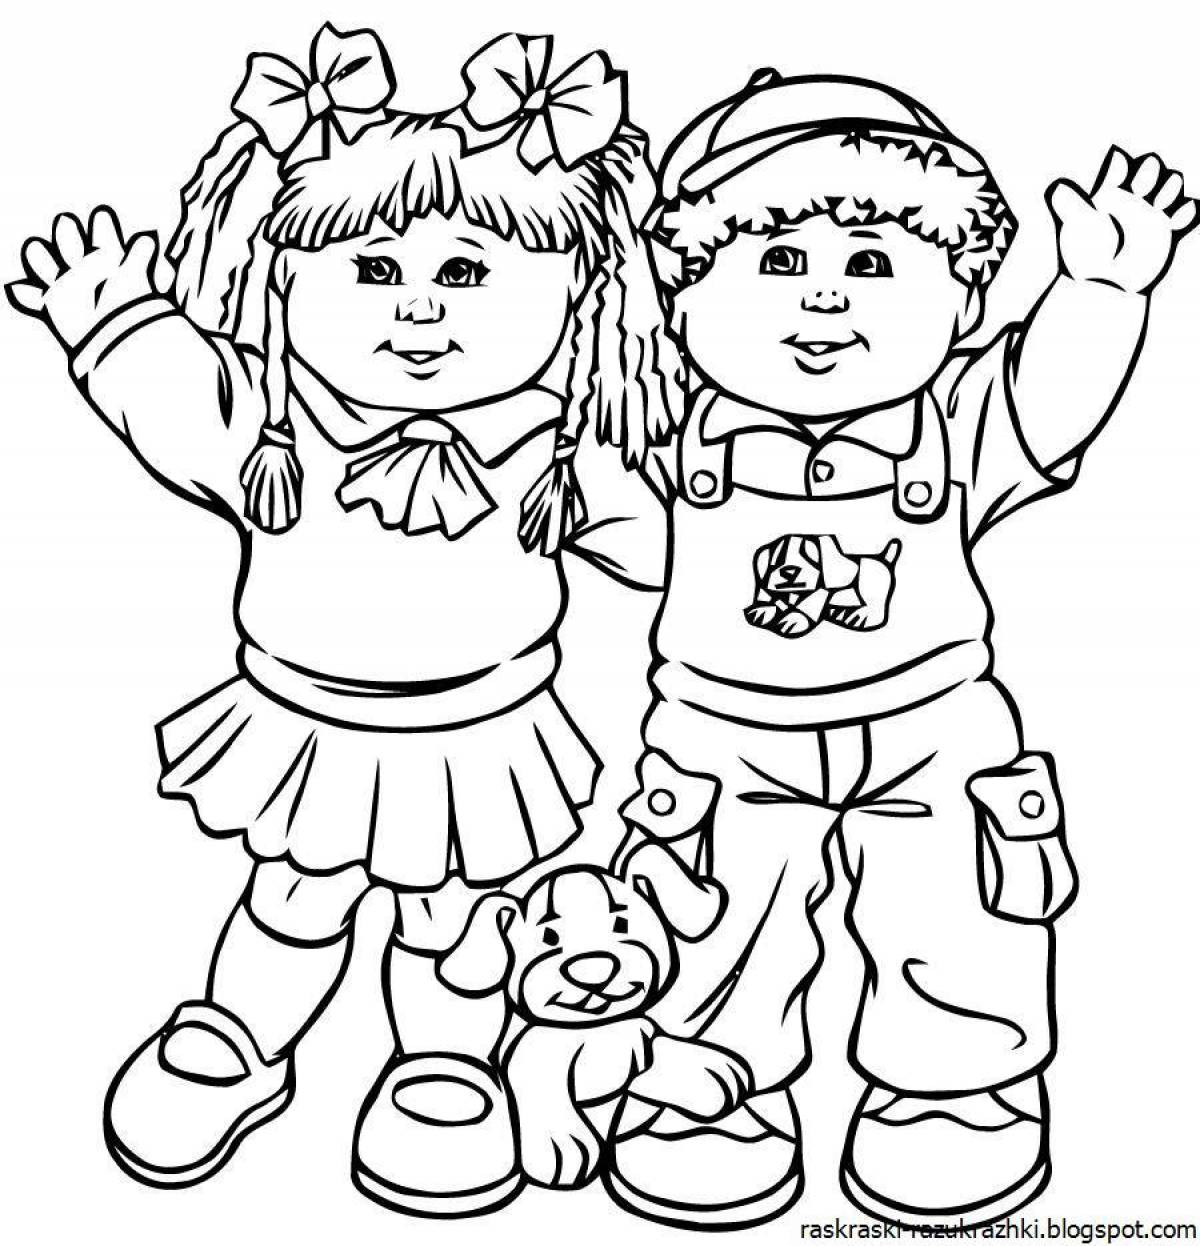 Crazy coloring book for girls and boys